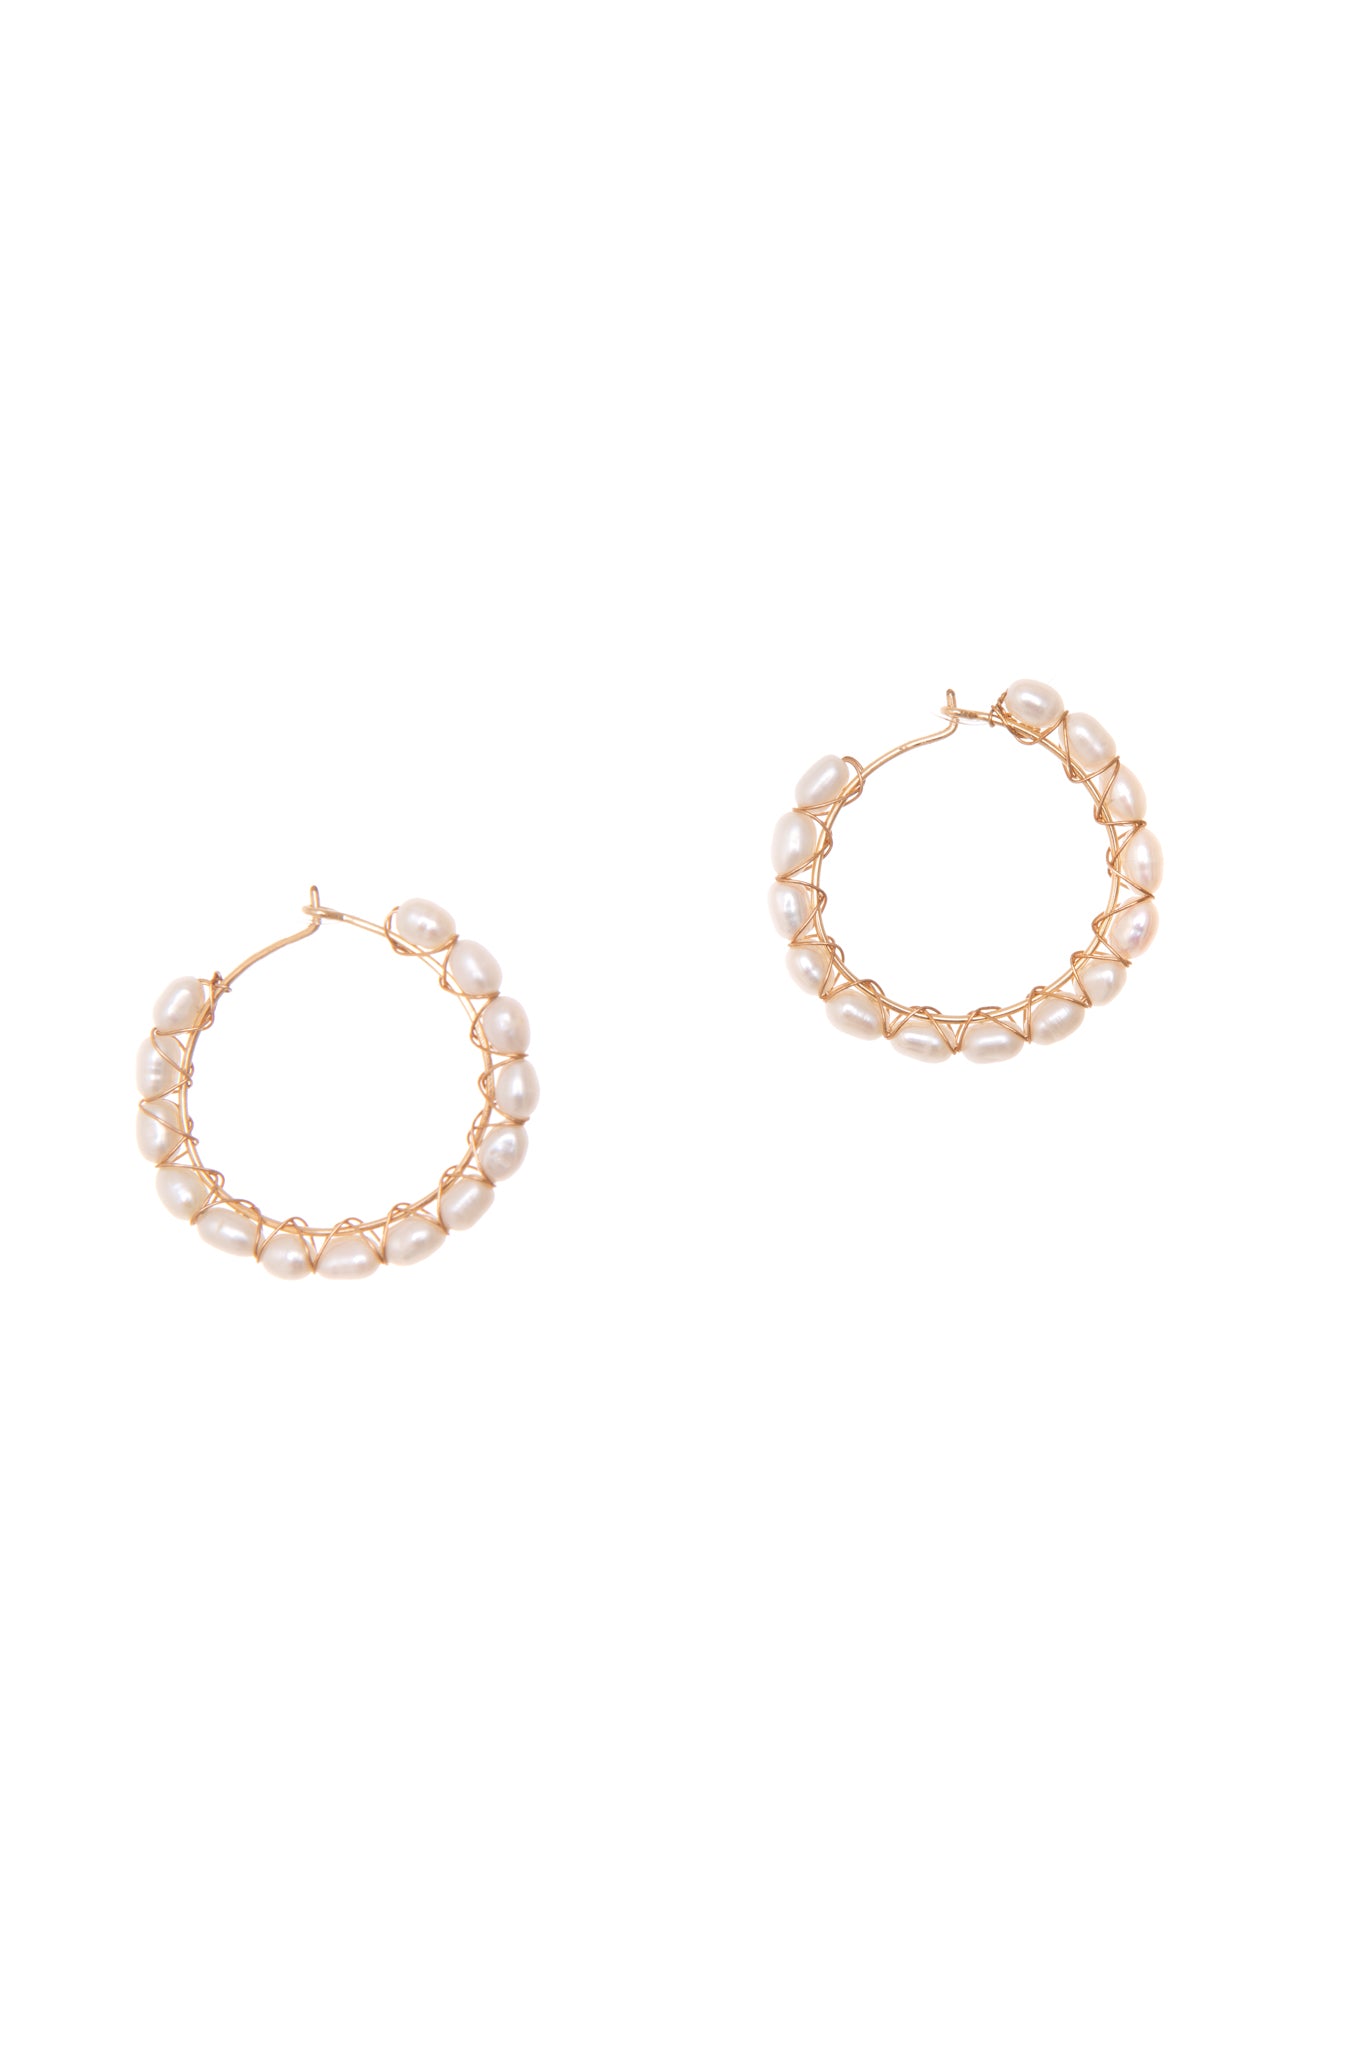 Luxuriate in the elegance of our Halo hoops featuring freshwater pearls strung along 14k gold-filled hoops.